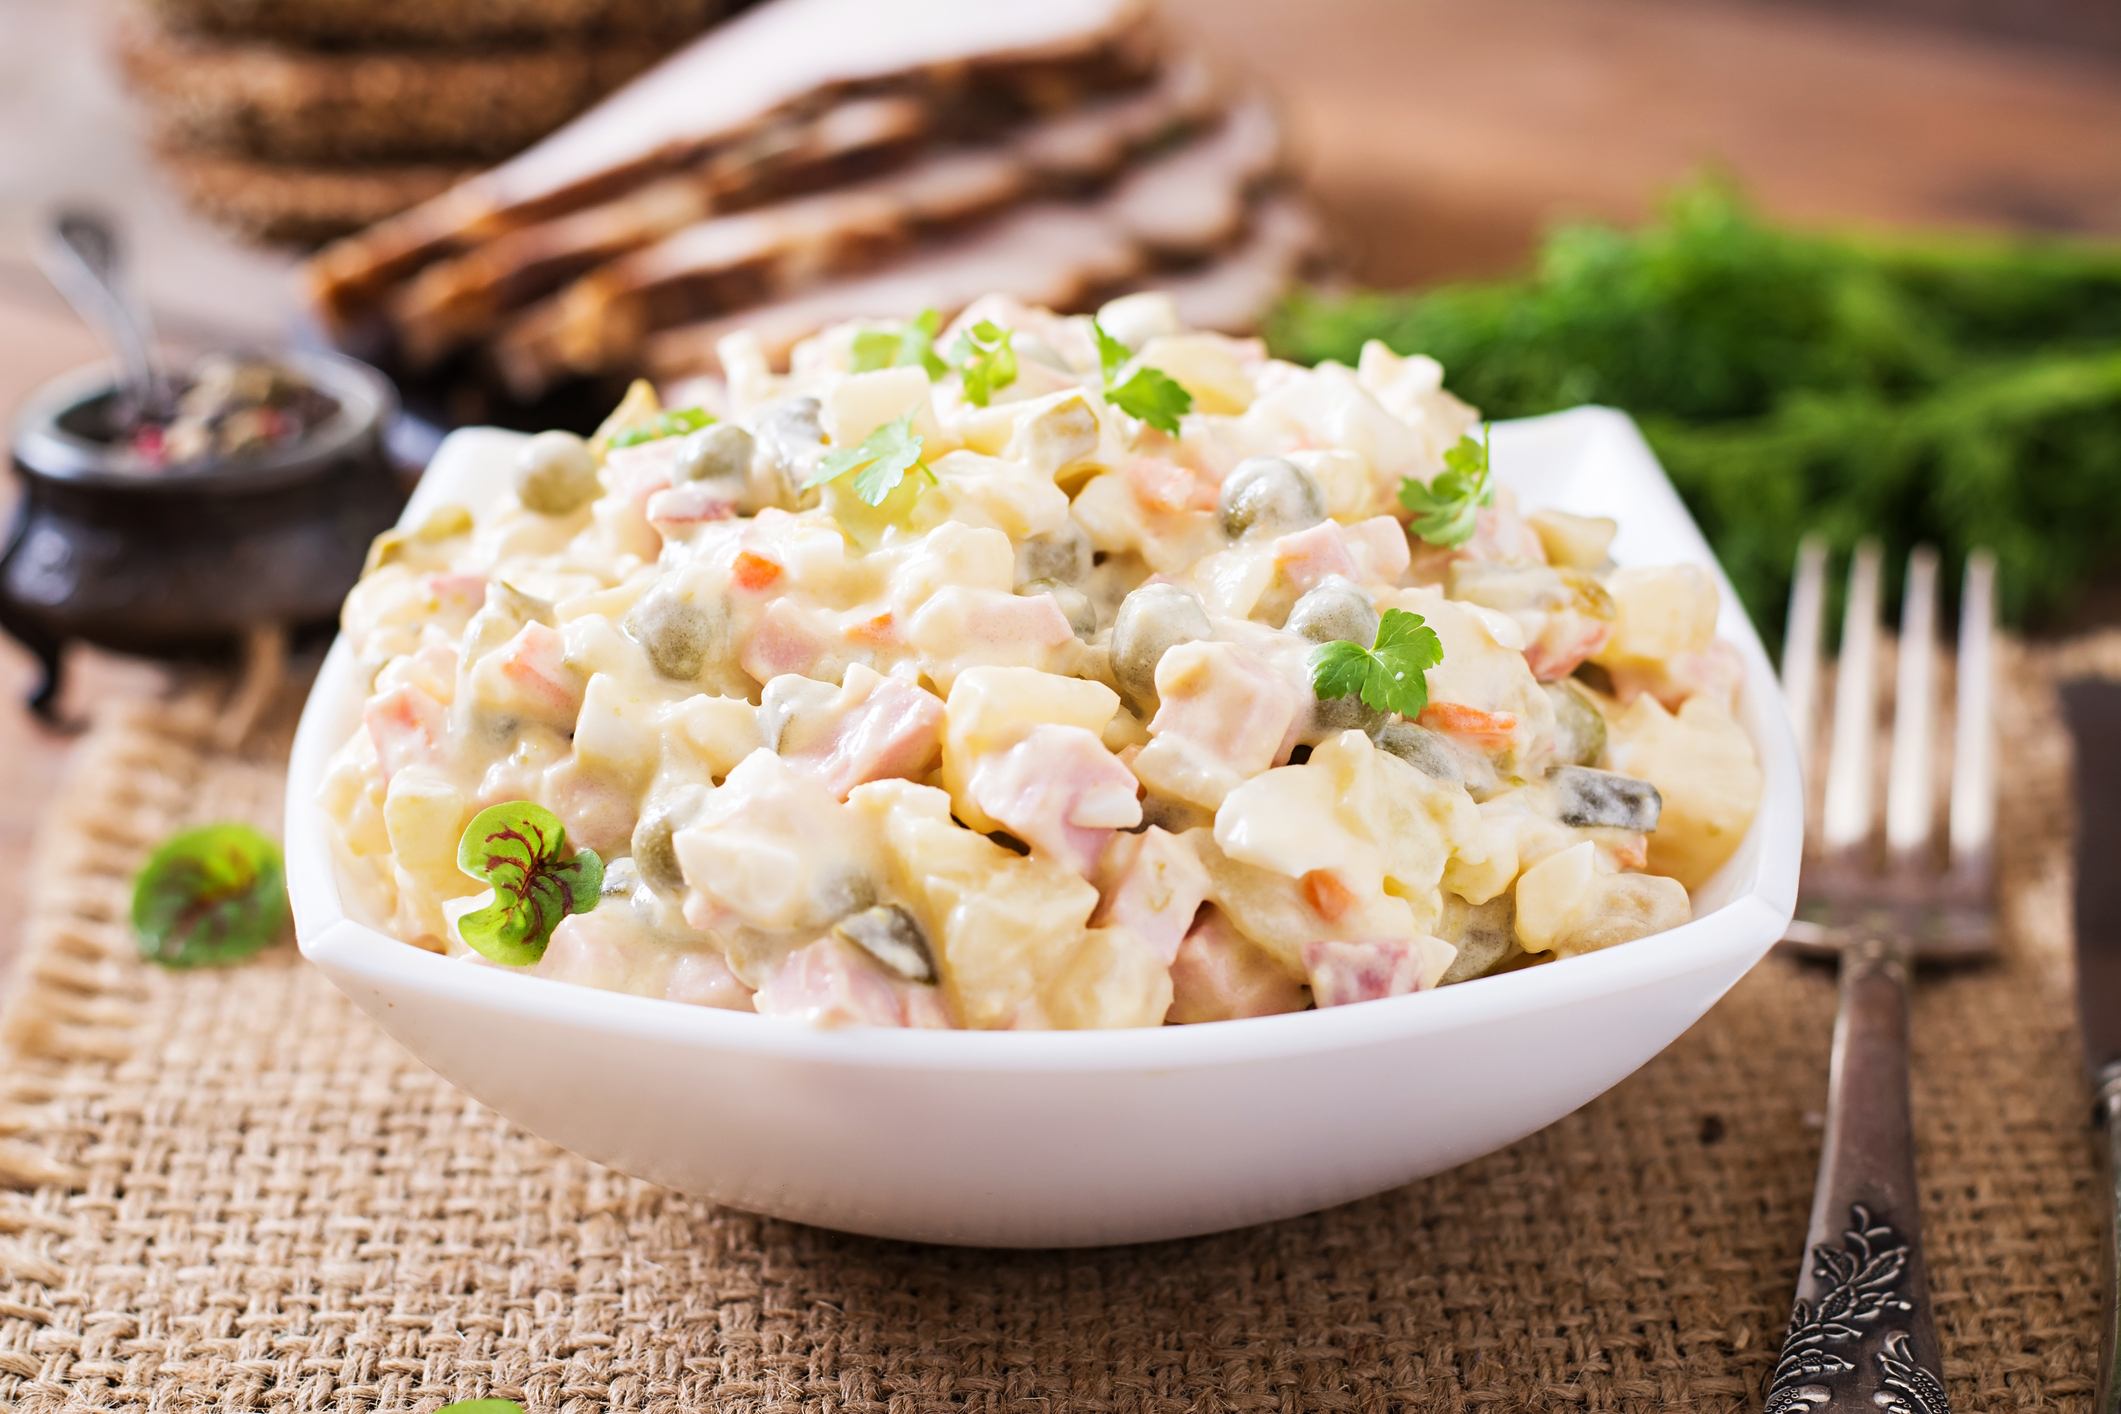 Traditional Russian mayonnaise salad "Olivier"